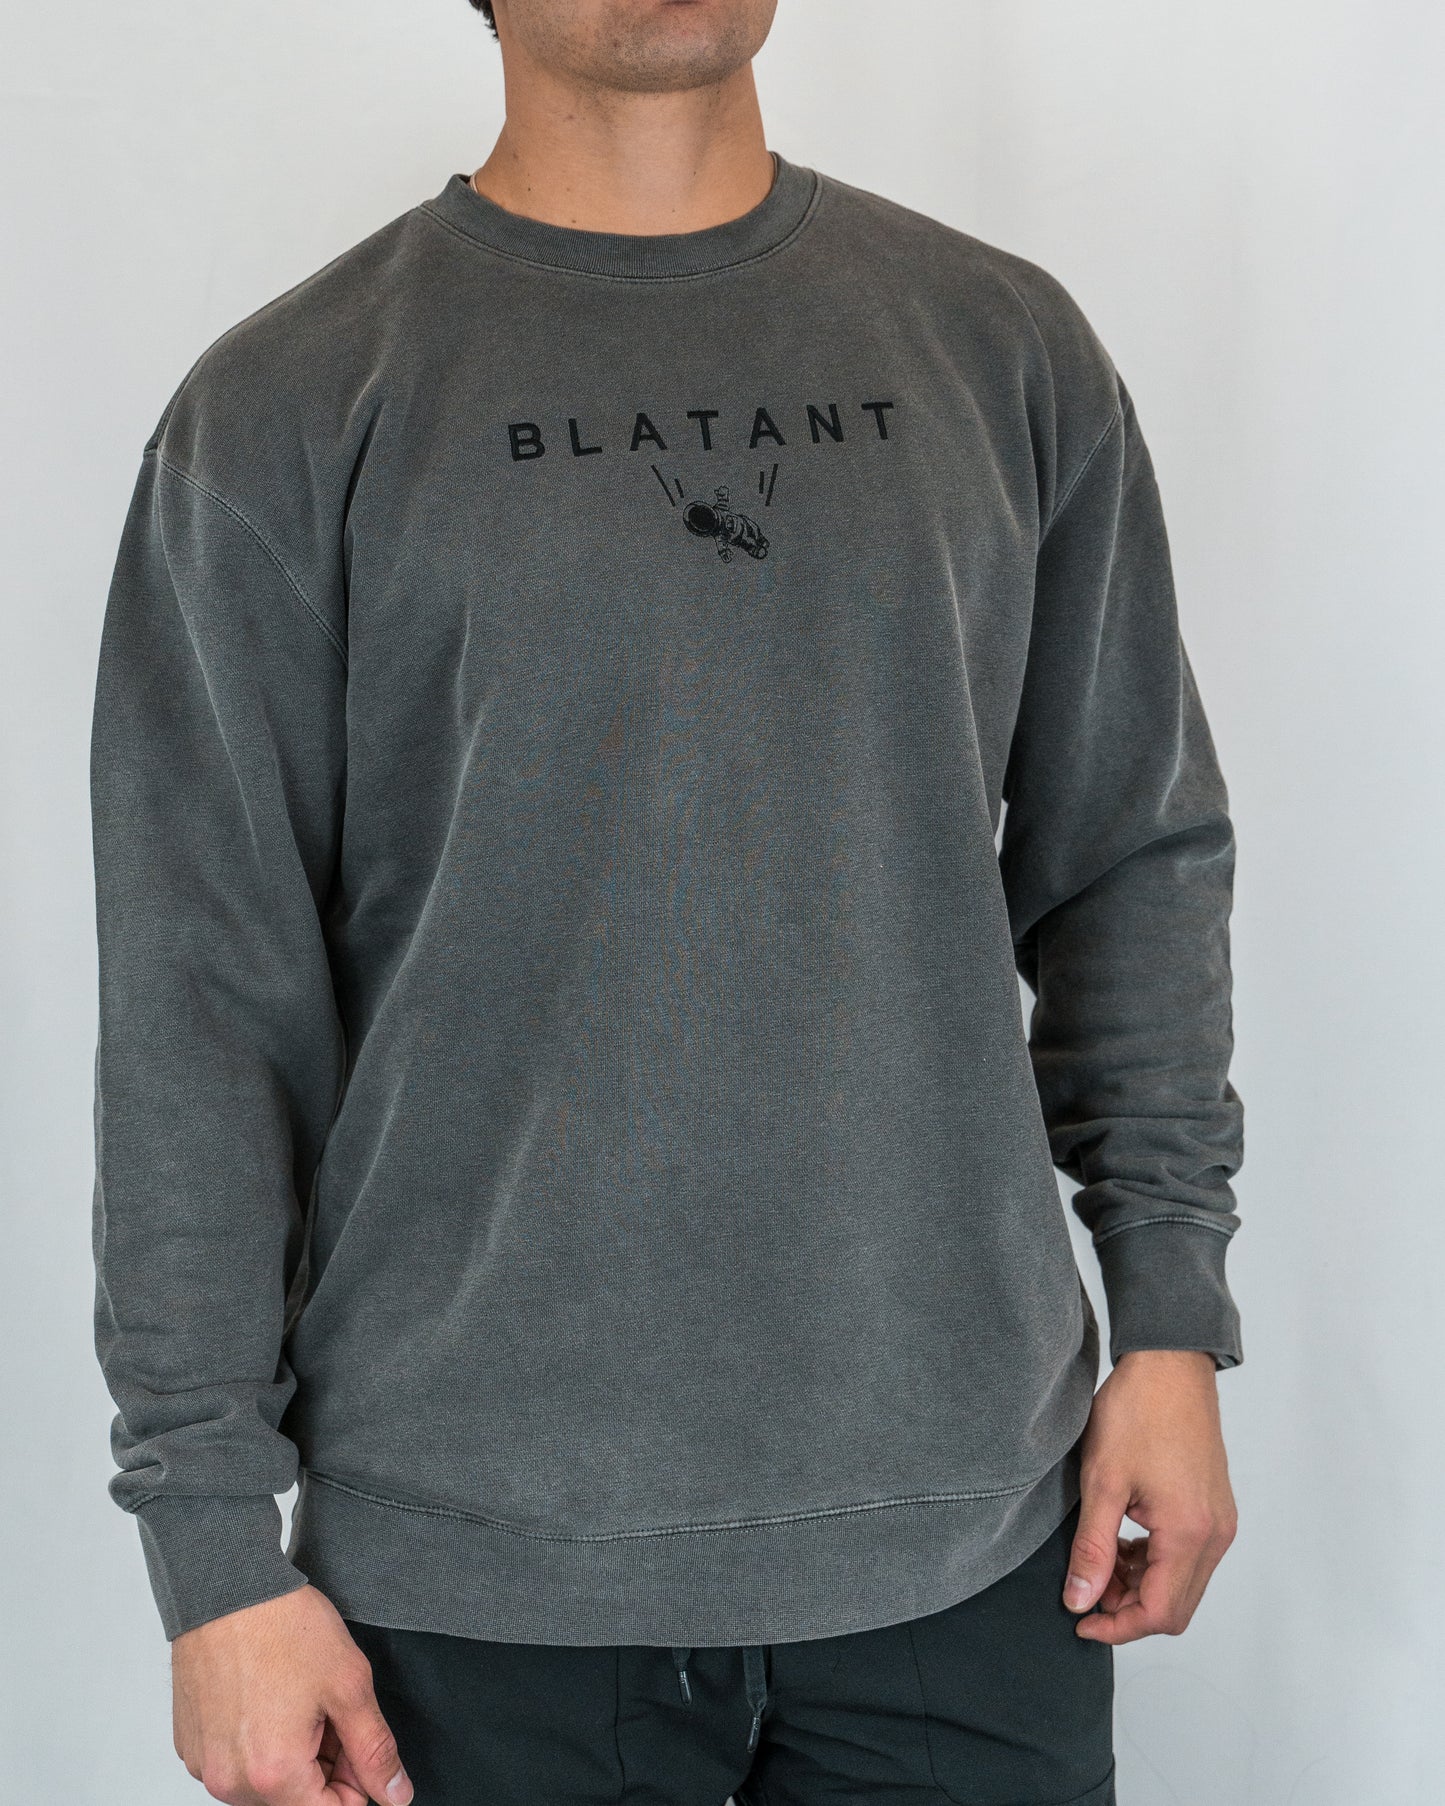 The Gravity Embroidered Crew Neck